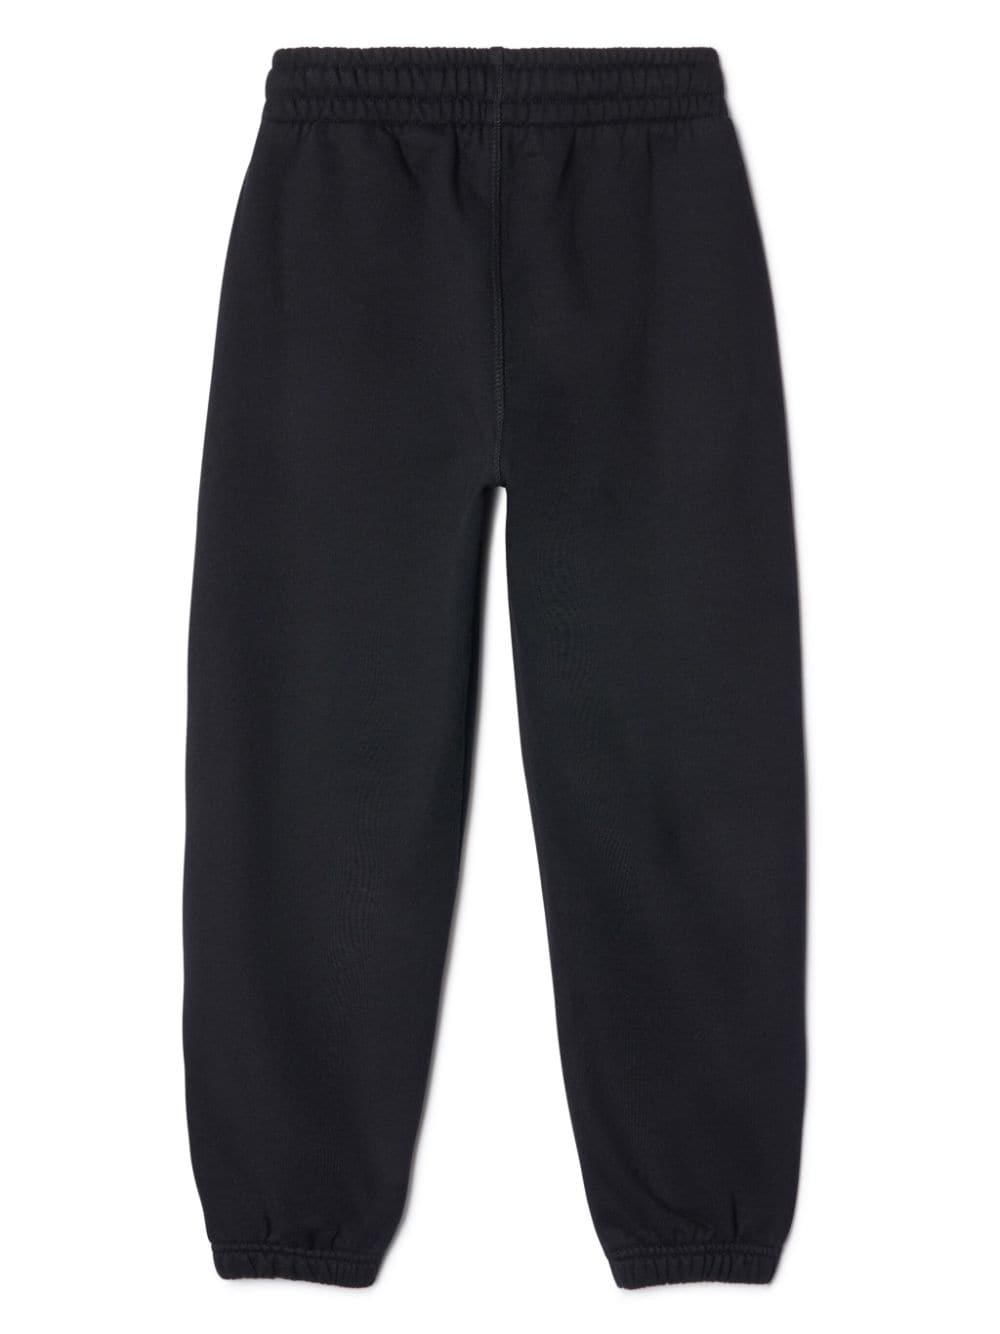 Black sports trousers for children with green logo